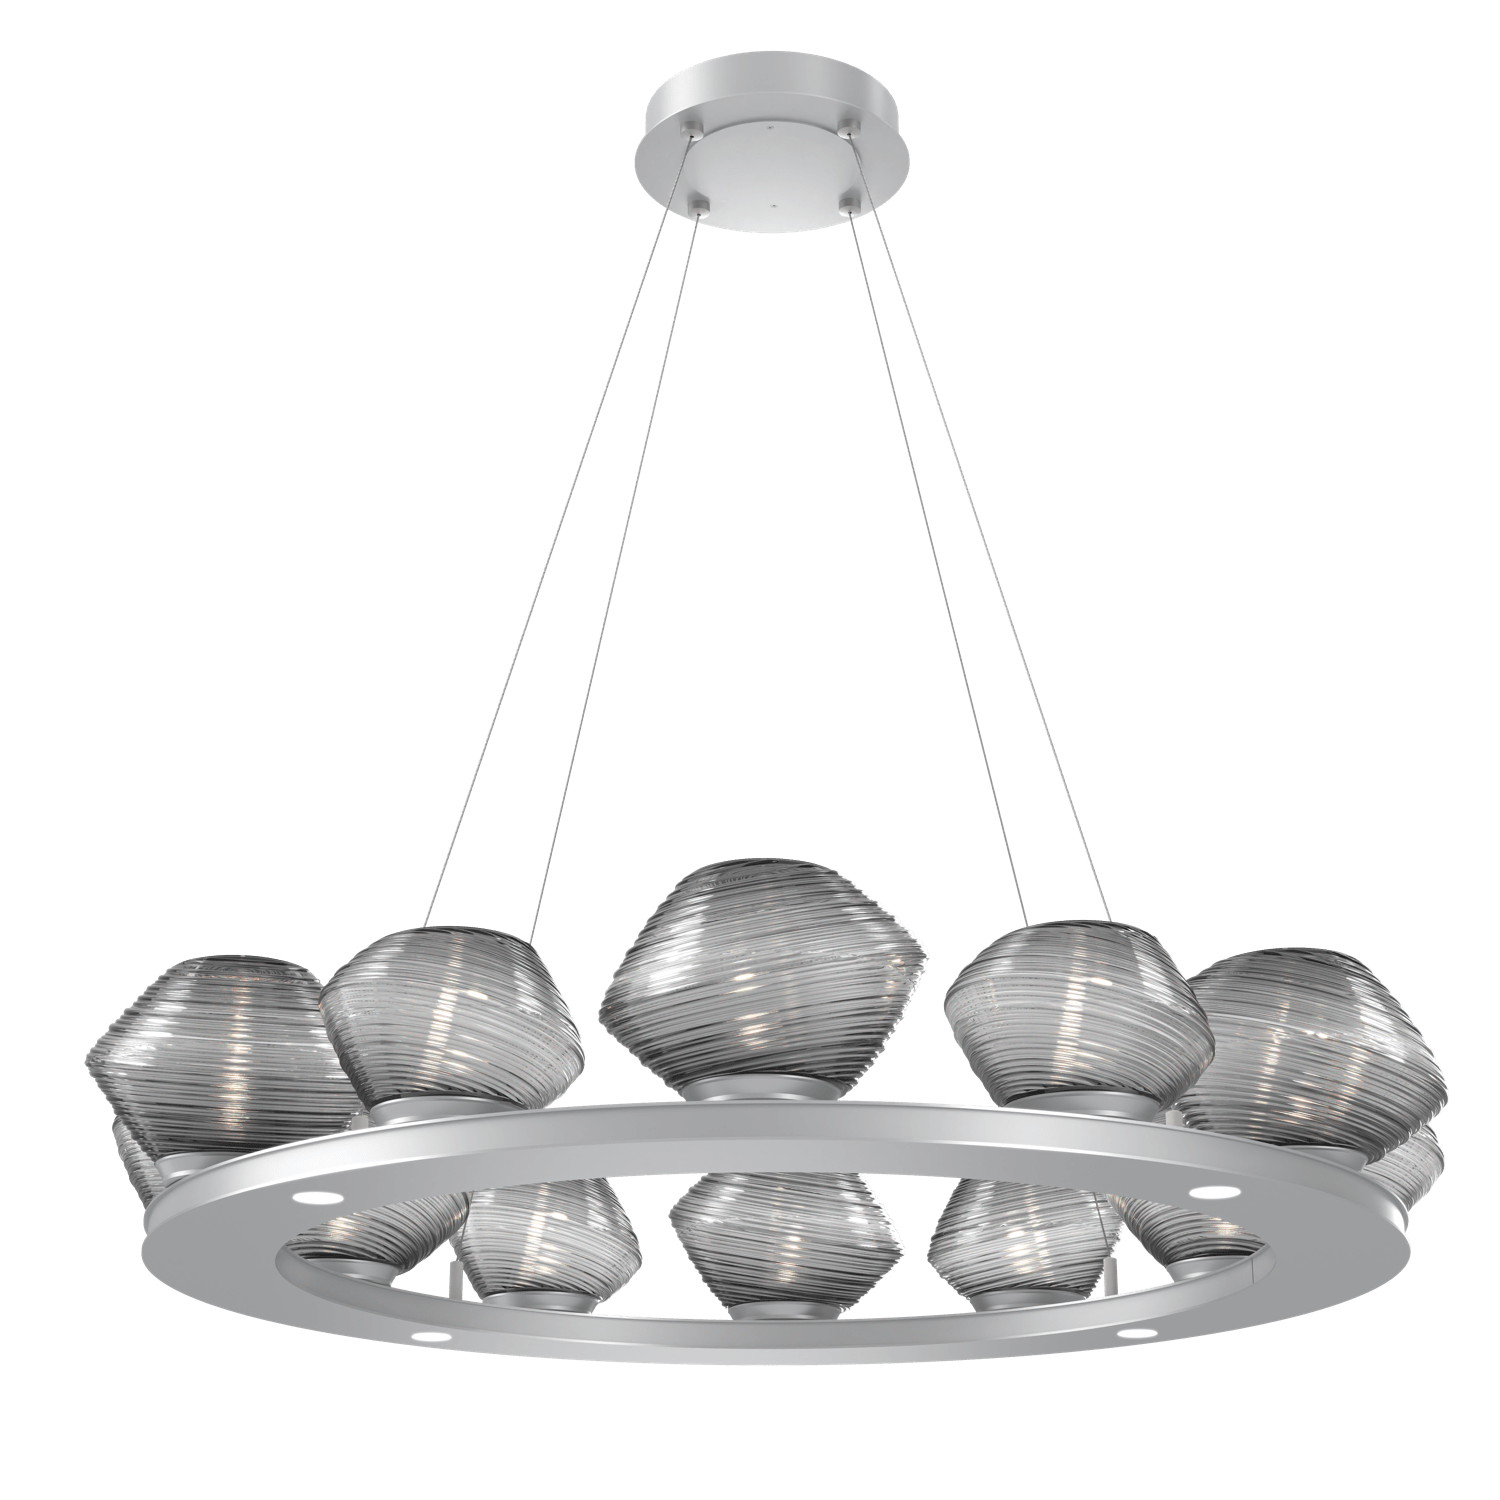 CHB0089-0C-CS-S-Hammerton-Studio-Mesa-36-inch-ring-chandelier-with-classic-silver-finish-and-smoke-blown-glass-shades-and-LED-lamping